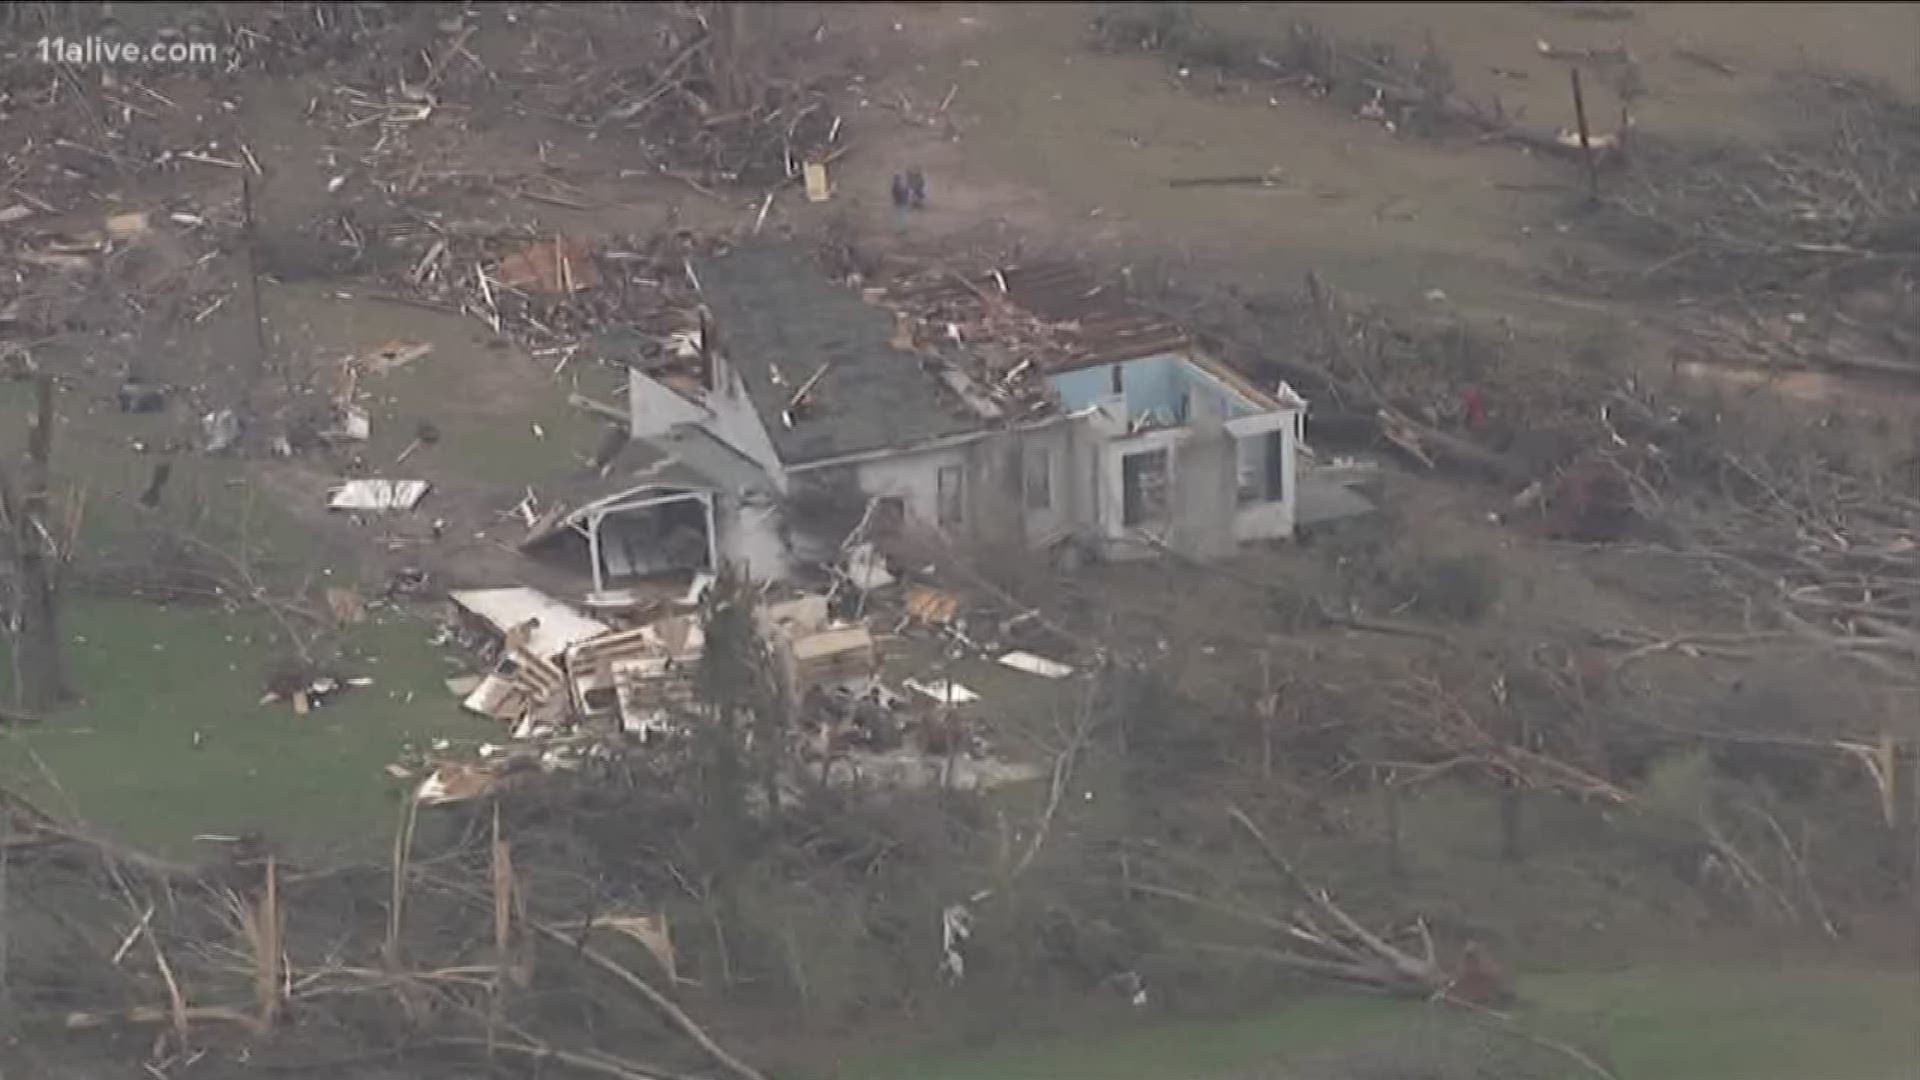 Here's a look at the devastation.